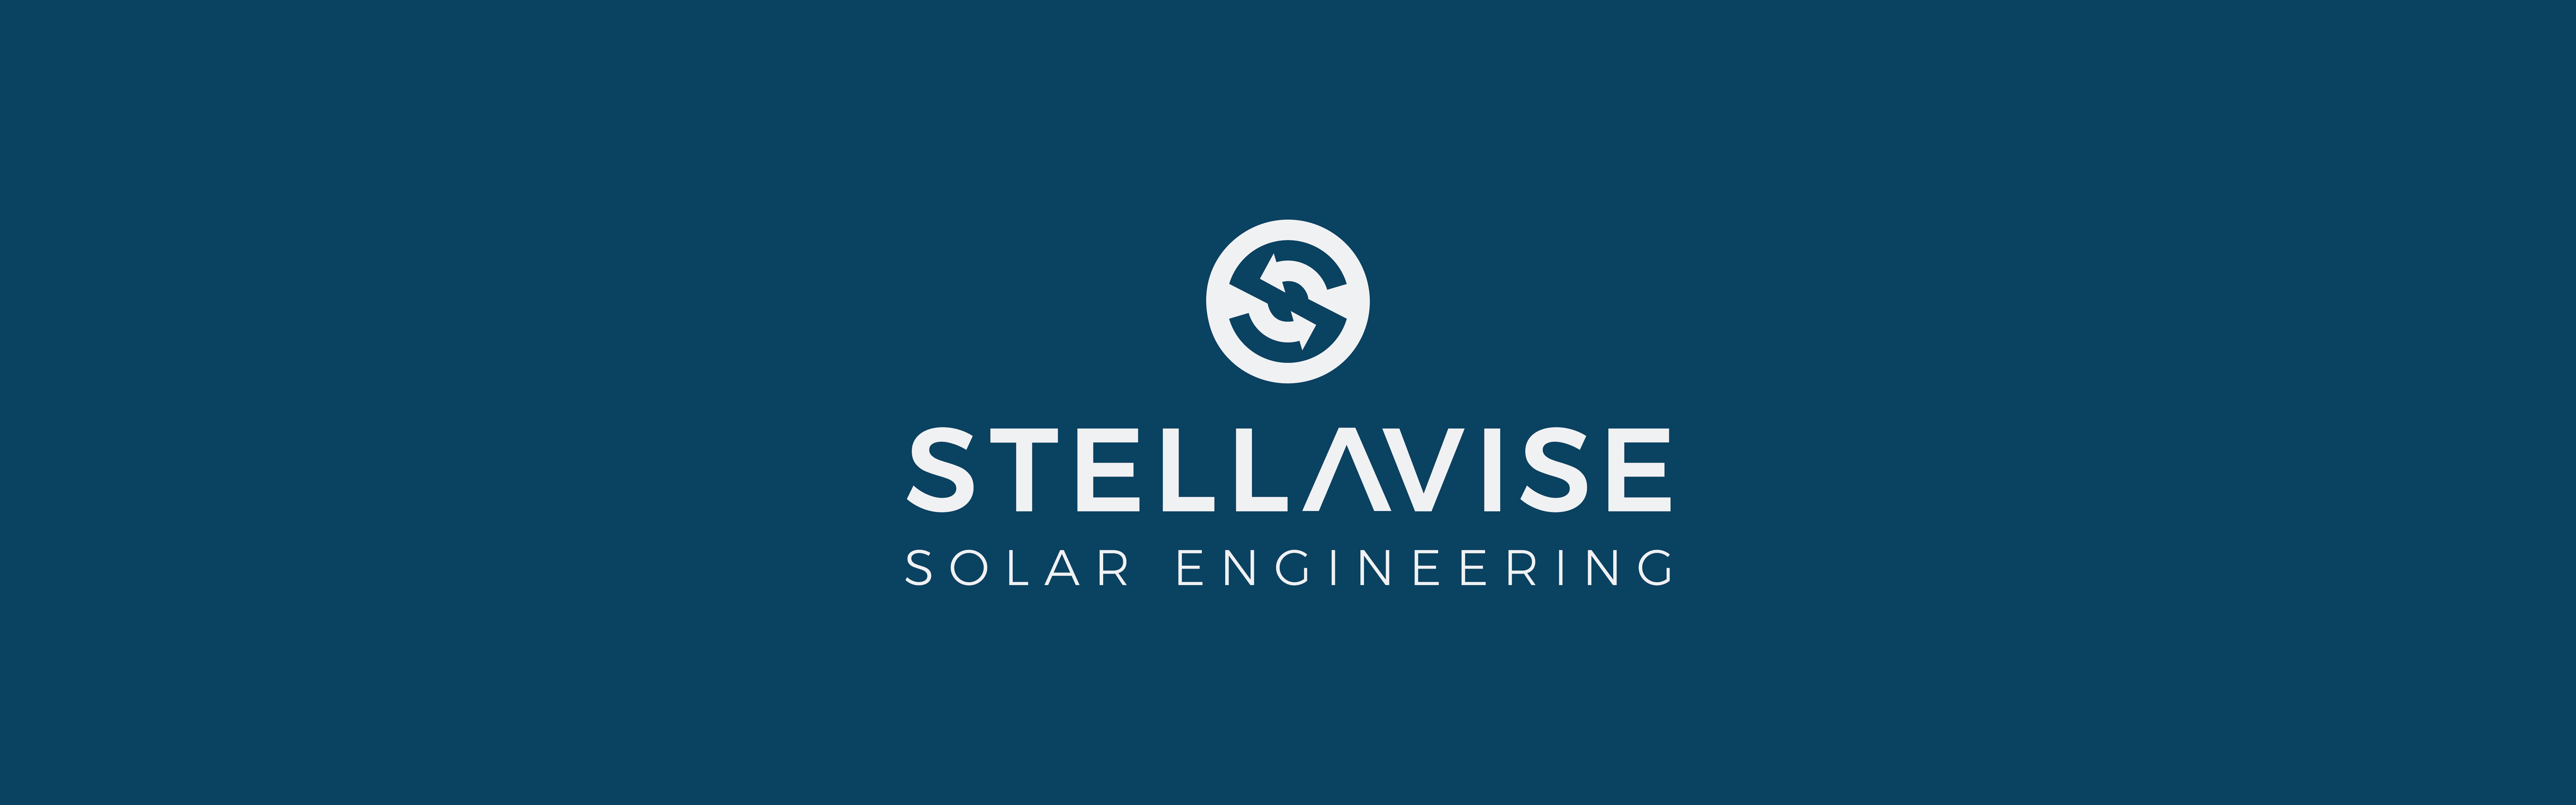 The image displays a logo with the name "Stellavise" in capital letters, alongside the tagline "solar engineering." The logo features an abstract symbol that contains elements suggestive of.